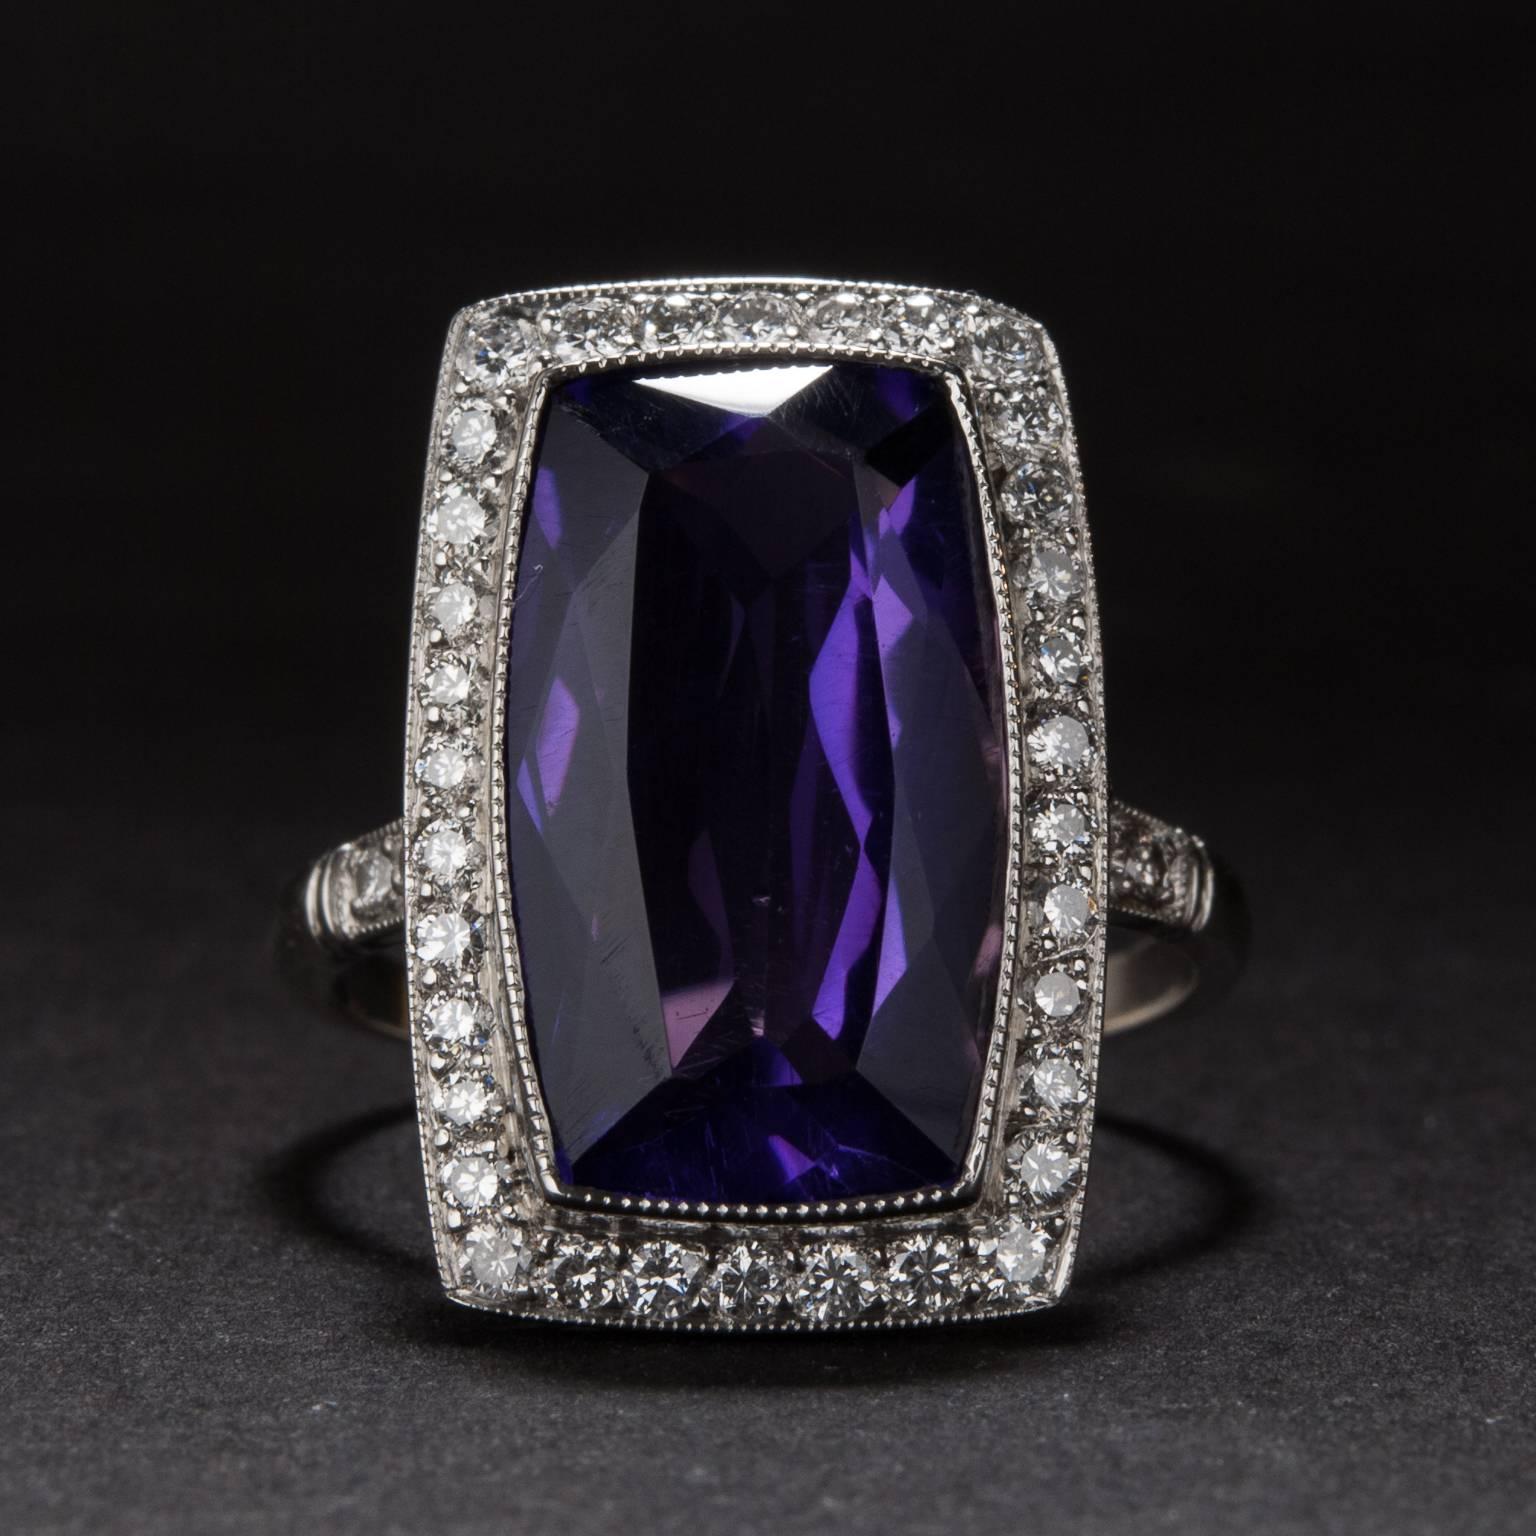 A stunning 5.95 carat amethyst with .65 total carats of diamond accents. This ring is crafted in platinum and is currently size 6.5.